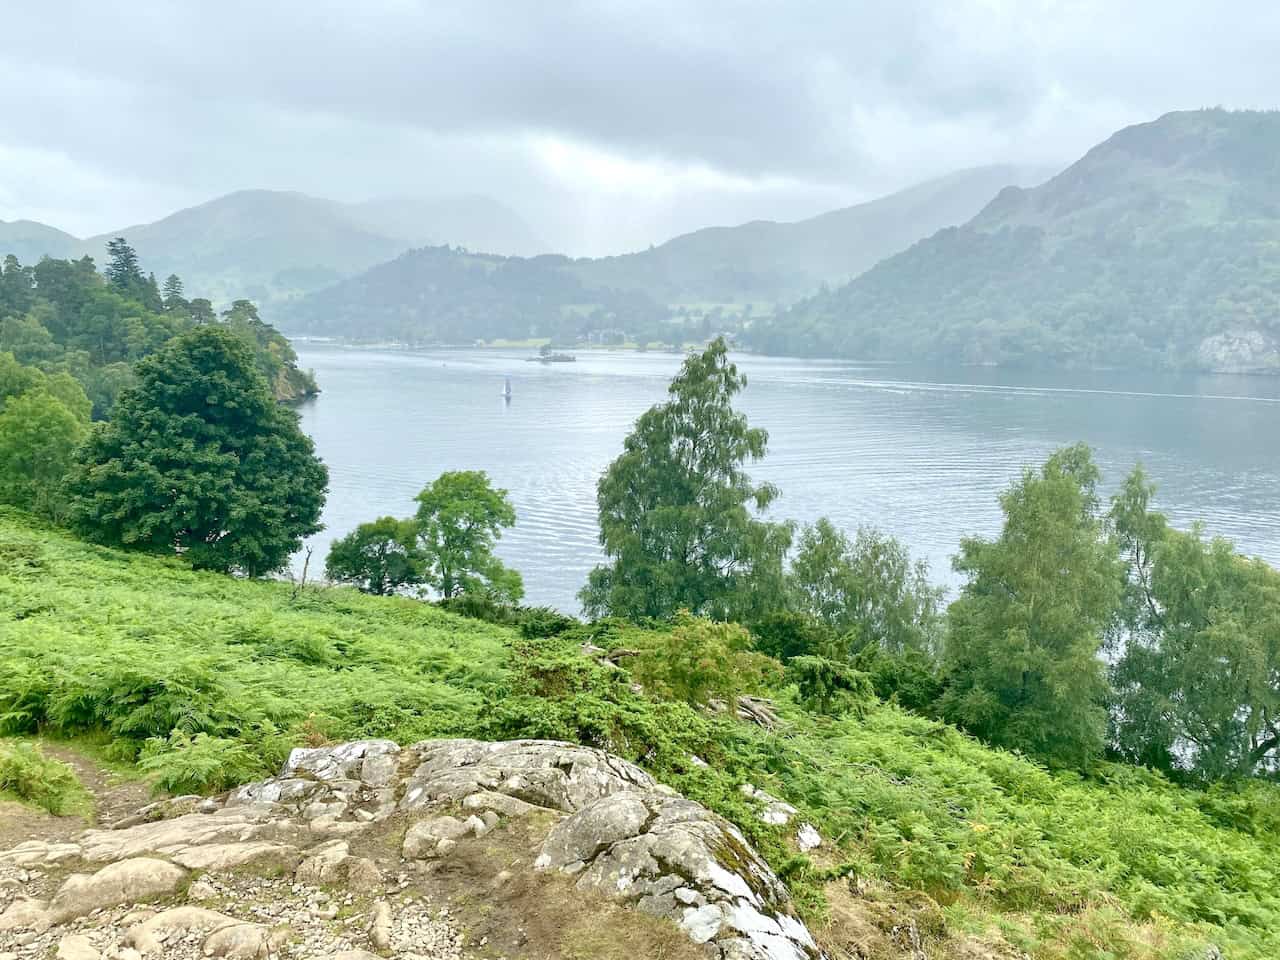 Views of Ullswater and the mountains on the south-west side of the lake, seen during our Place Fell walk.